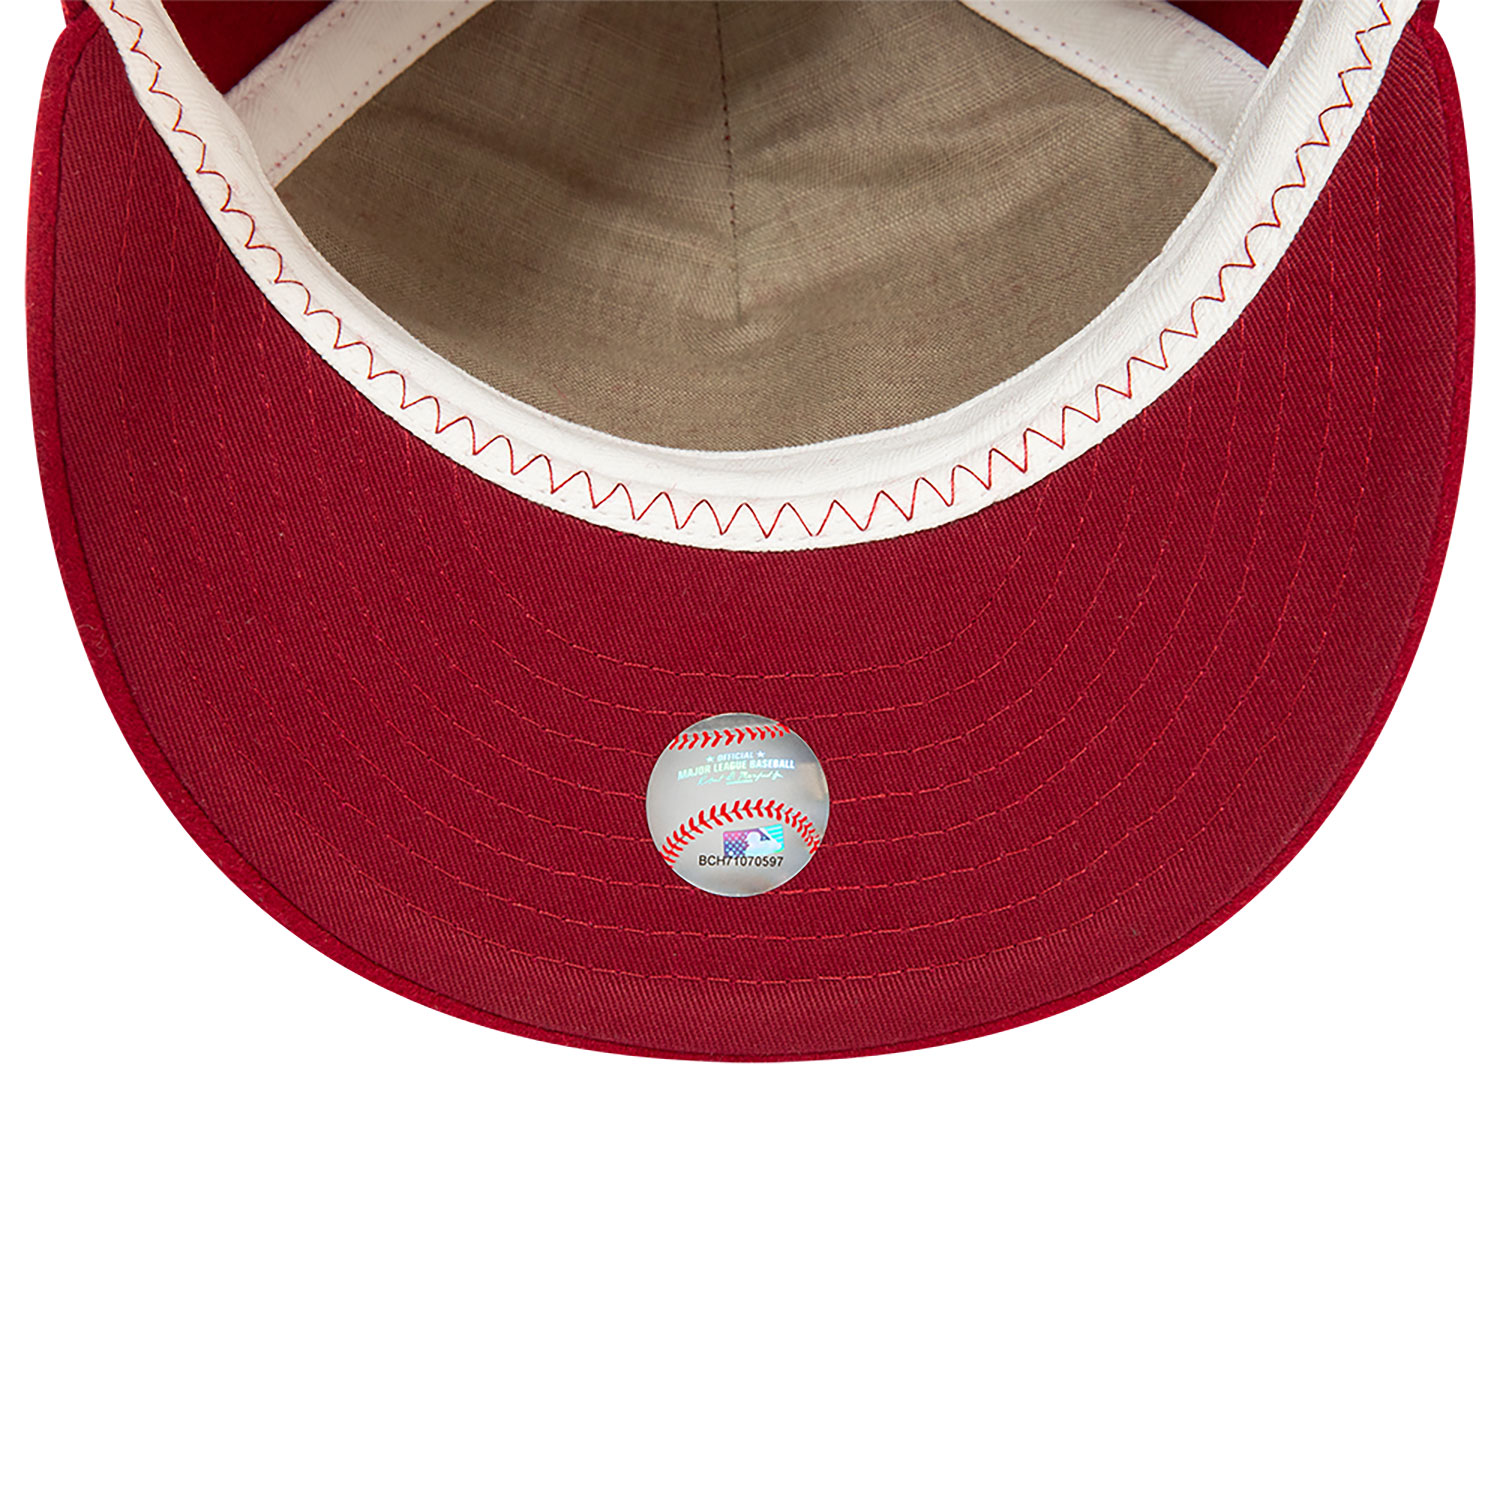 New Era St. Louis Cardinals MLB Cooperstown Retrocrown 9FIFTY, red